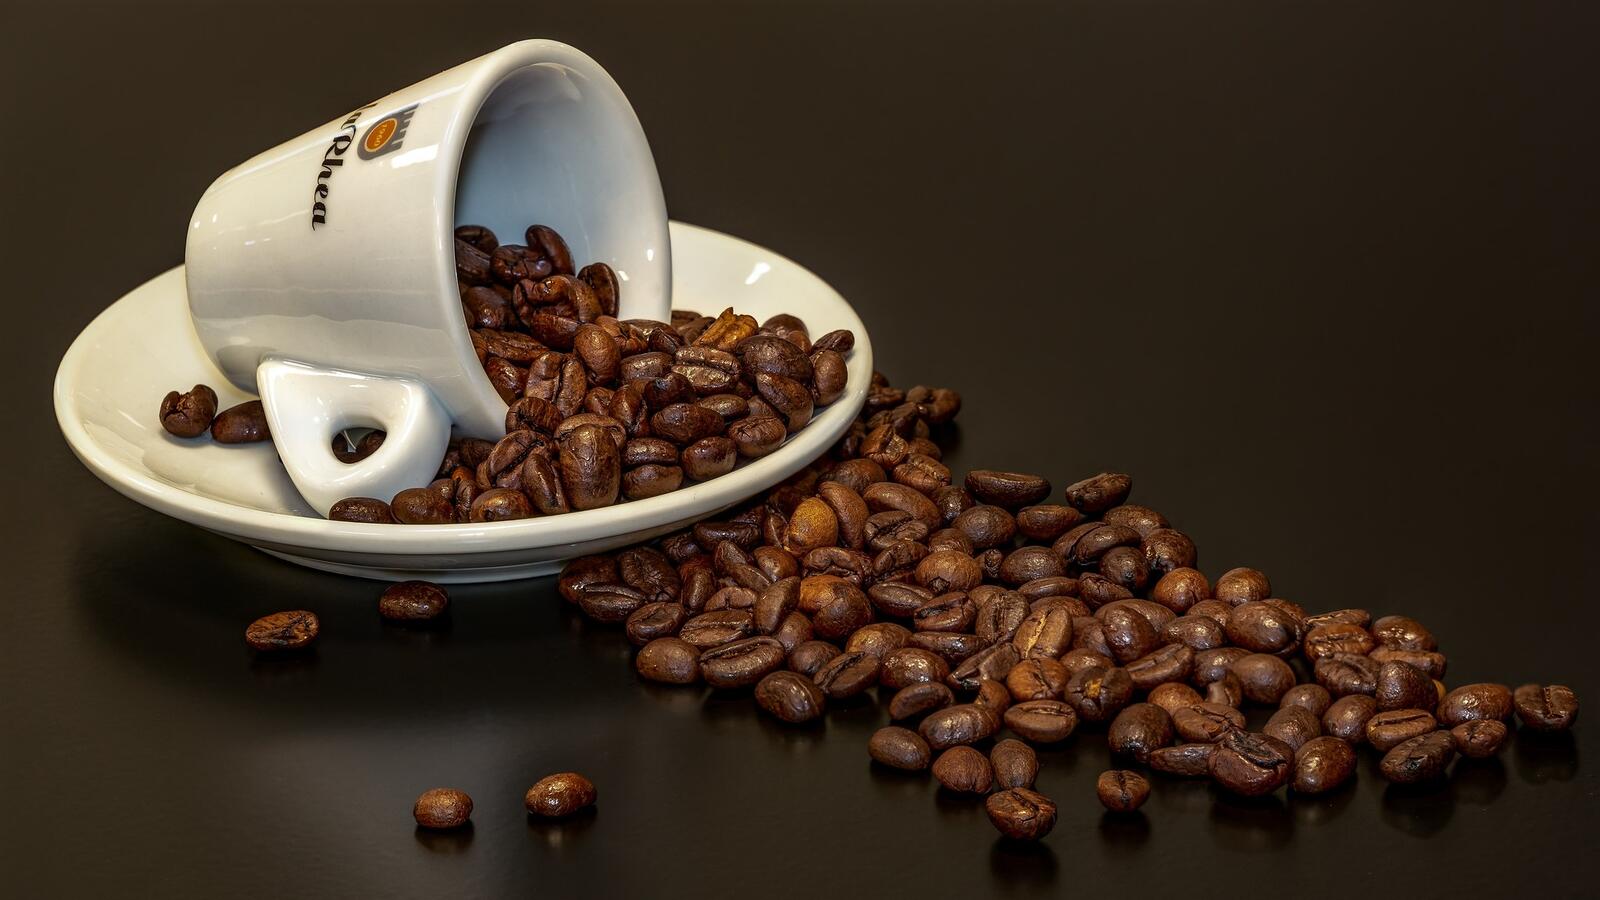 Wallpapers wallpaper cup coffee beans close on the desktop